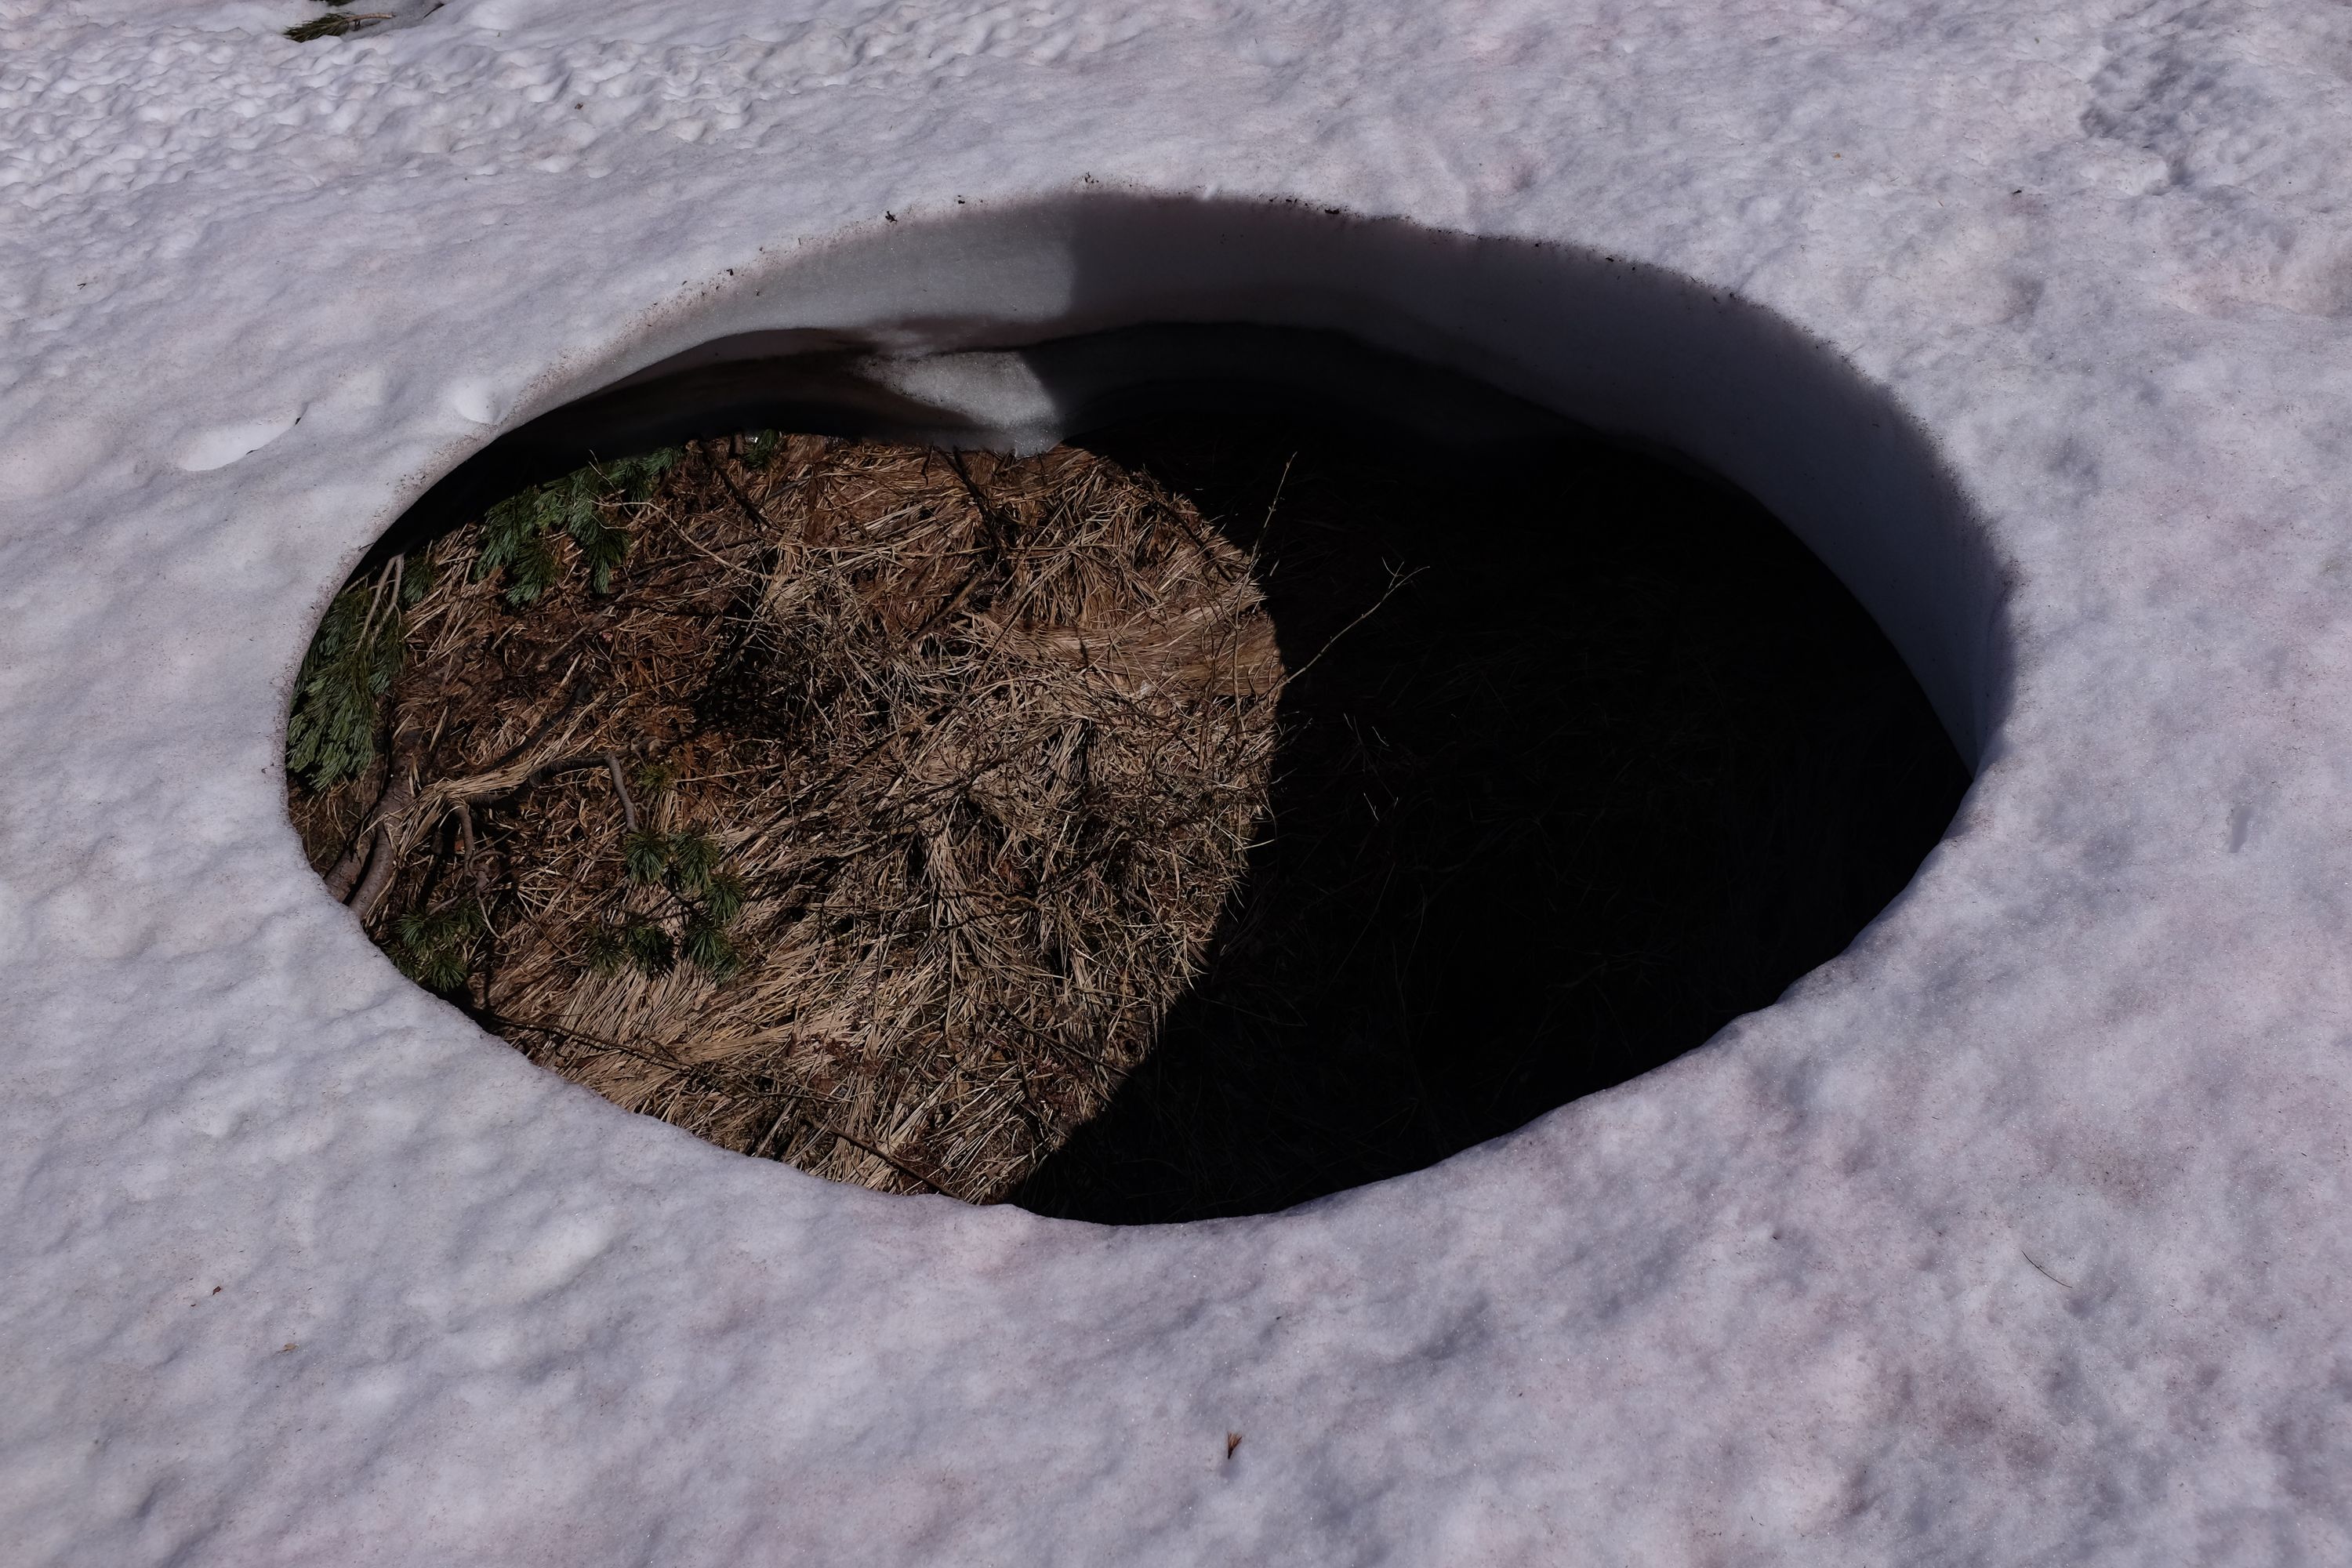 A large, perfectly round hole in last winter’s snow.